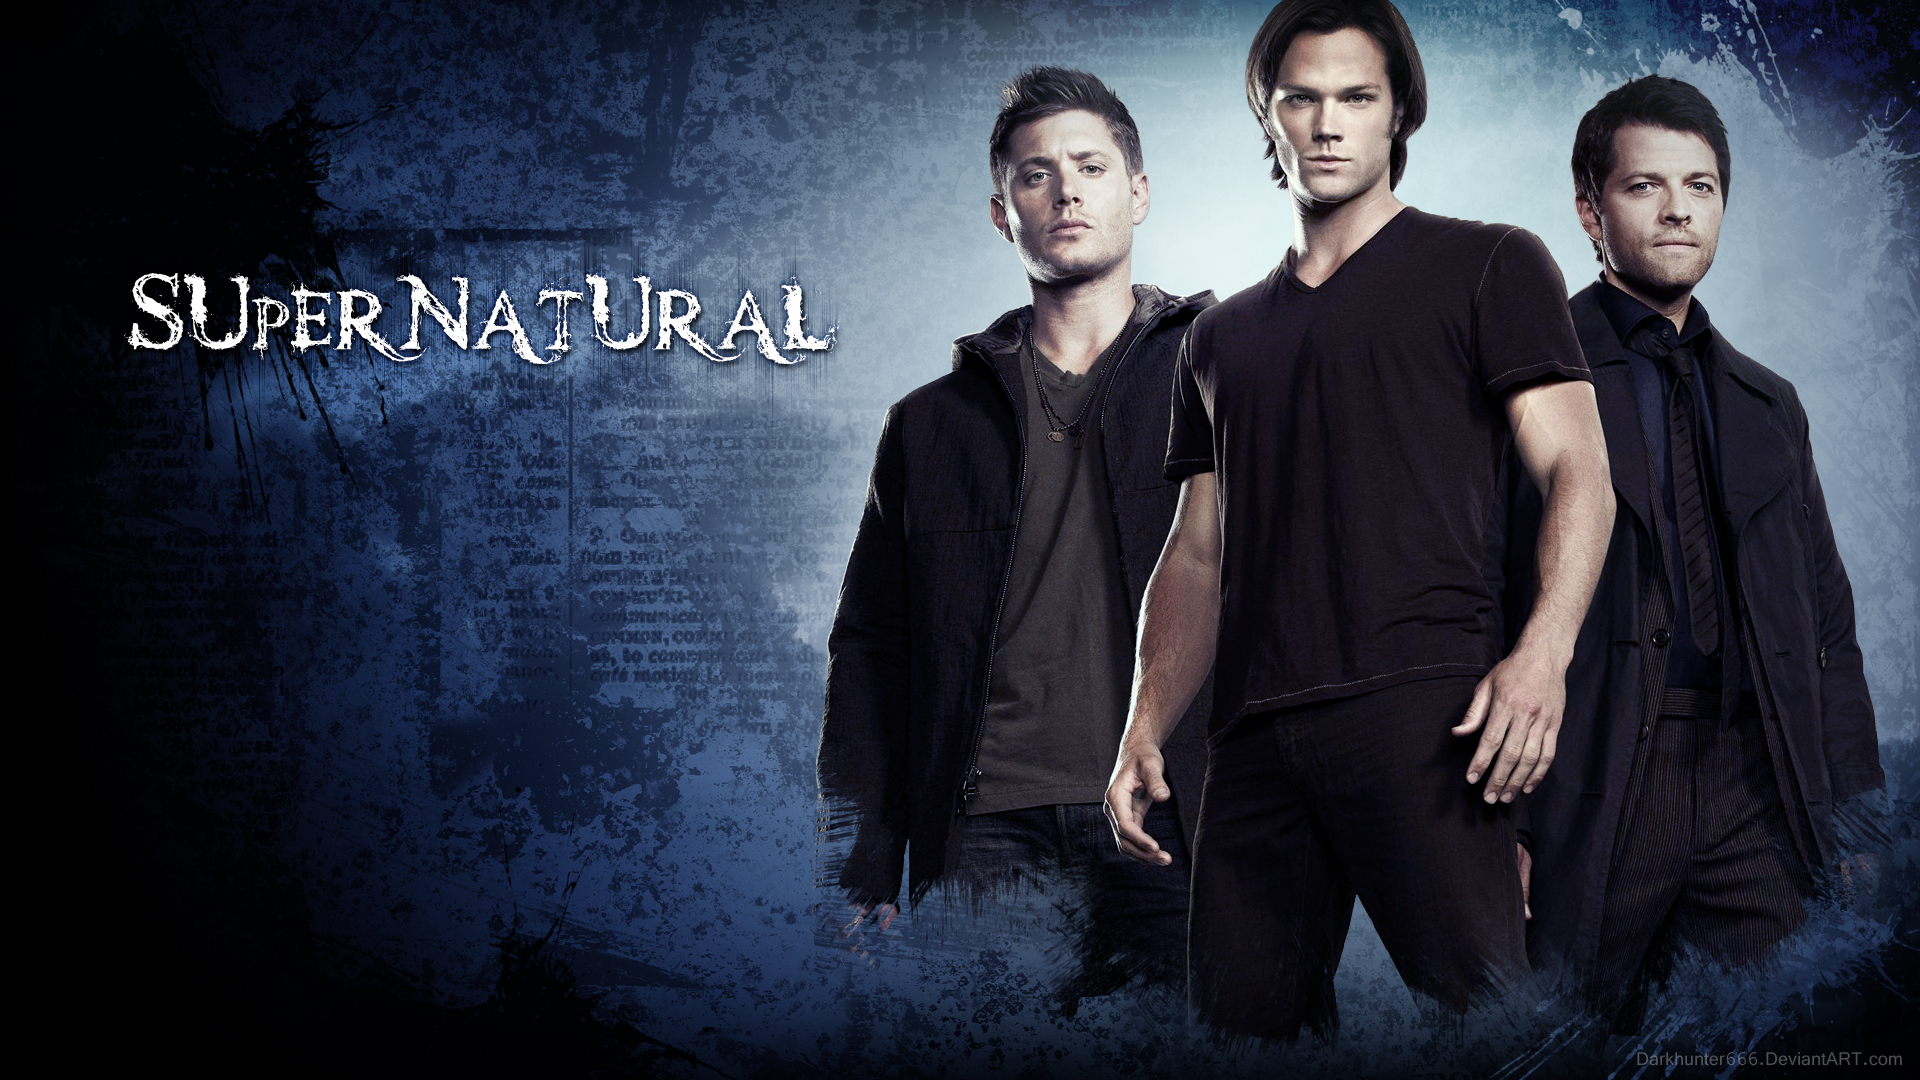 Supernatural Wallpaper High Resolution And Quality